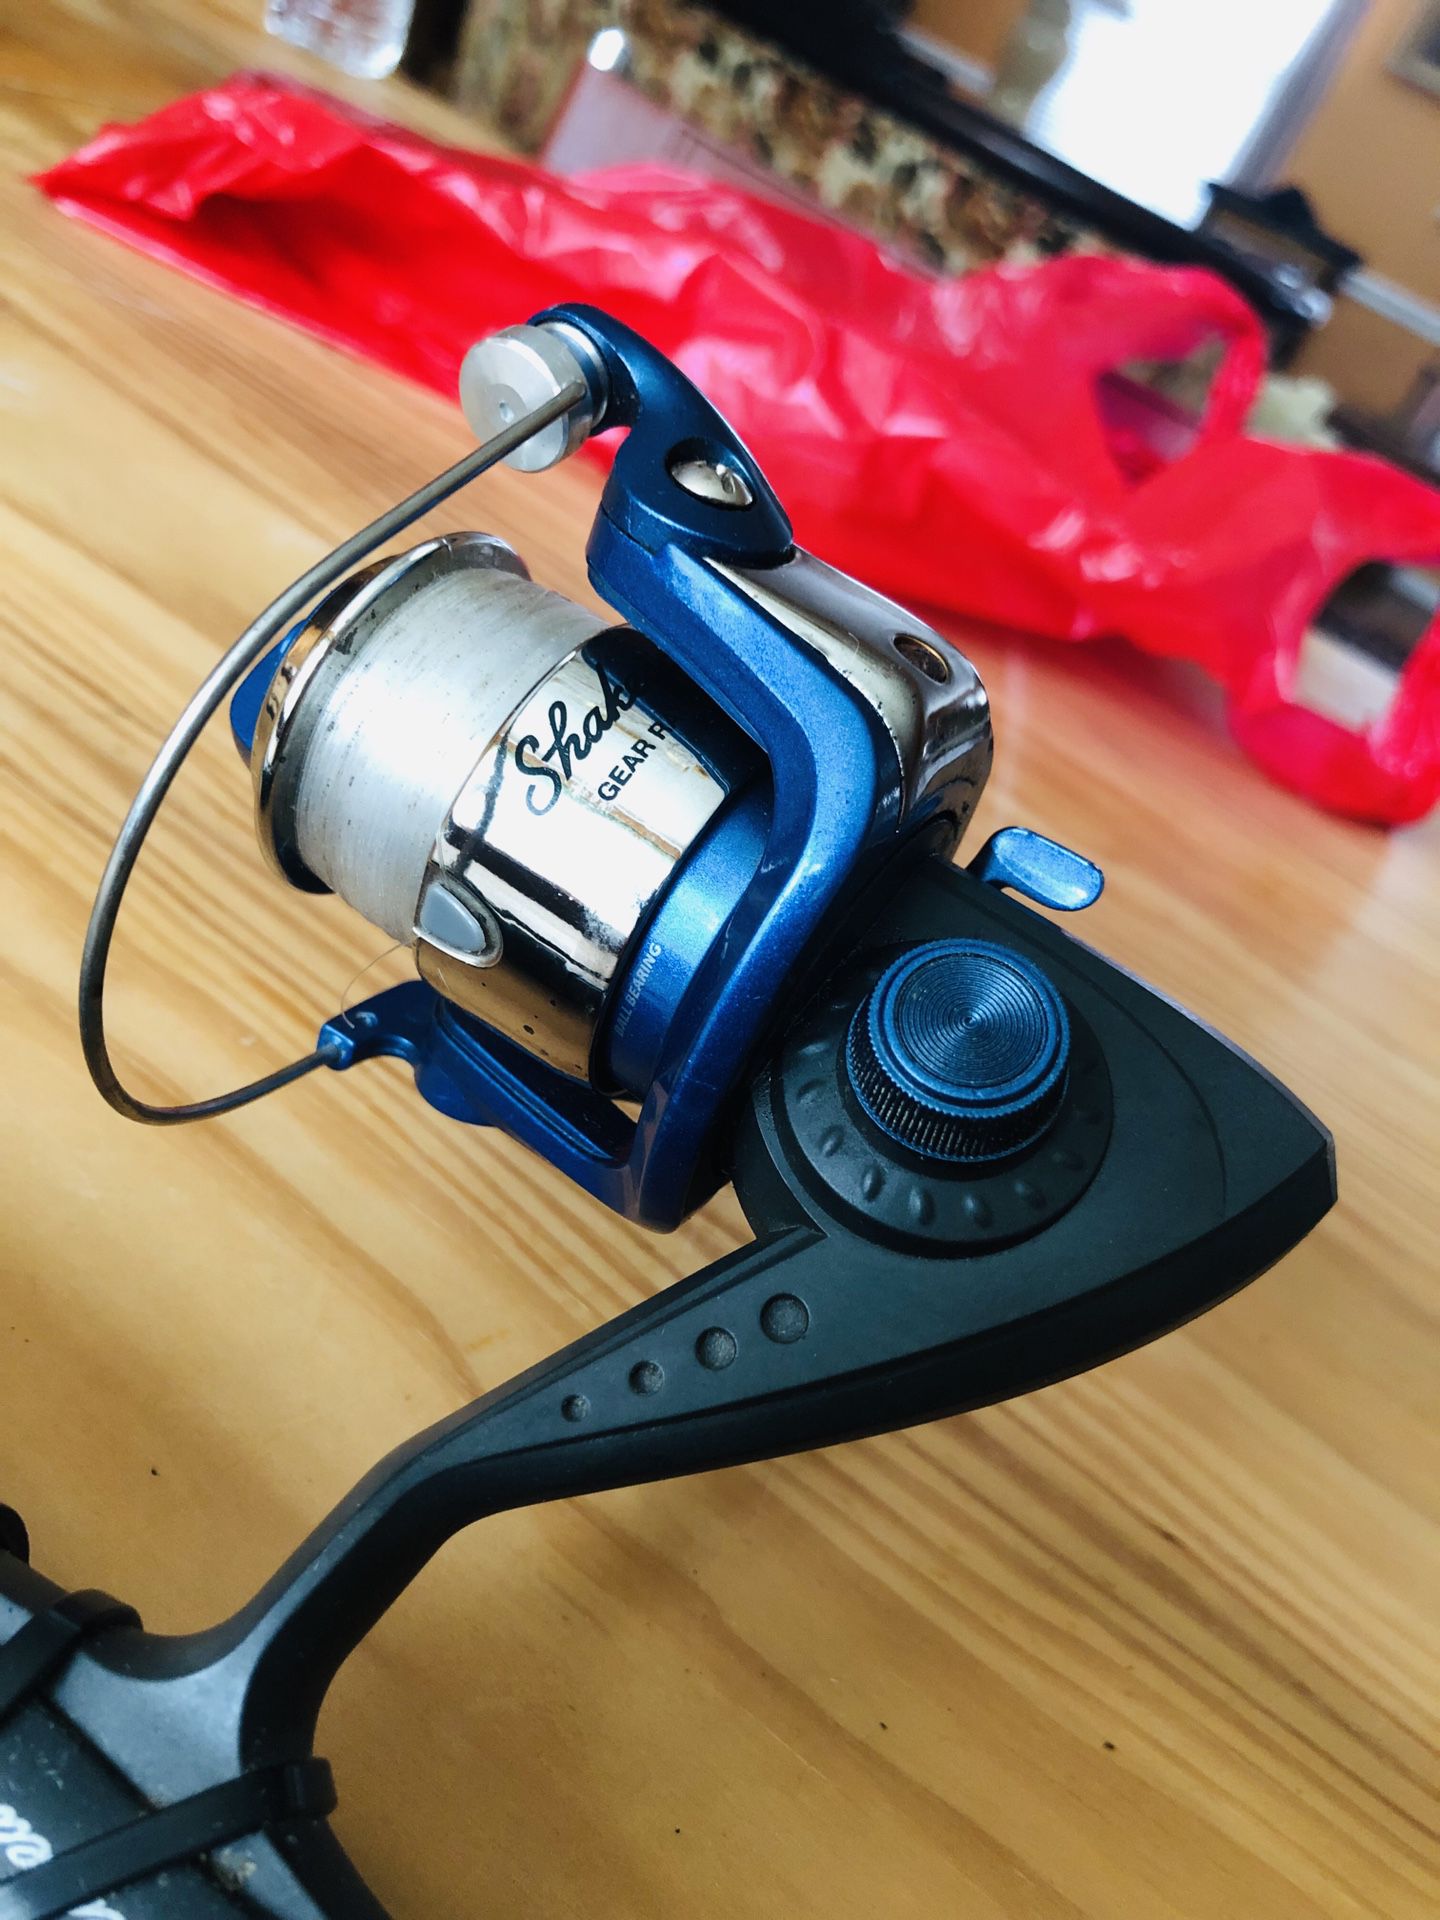 Shakespeare Reverb Spinning Reel and Fishing Rod for Sale in Fort